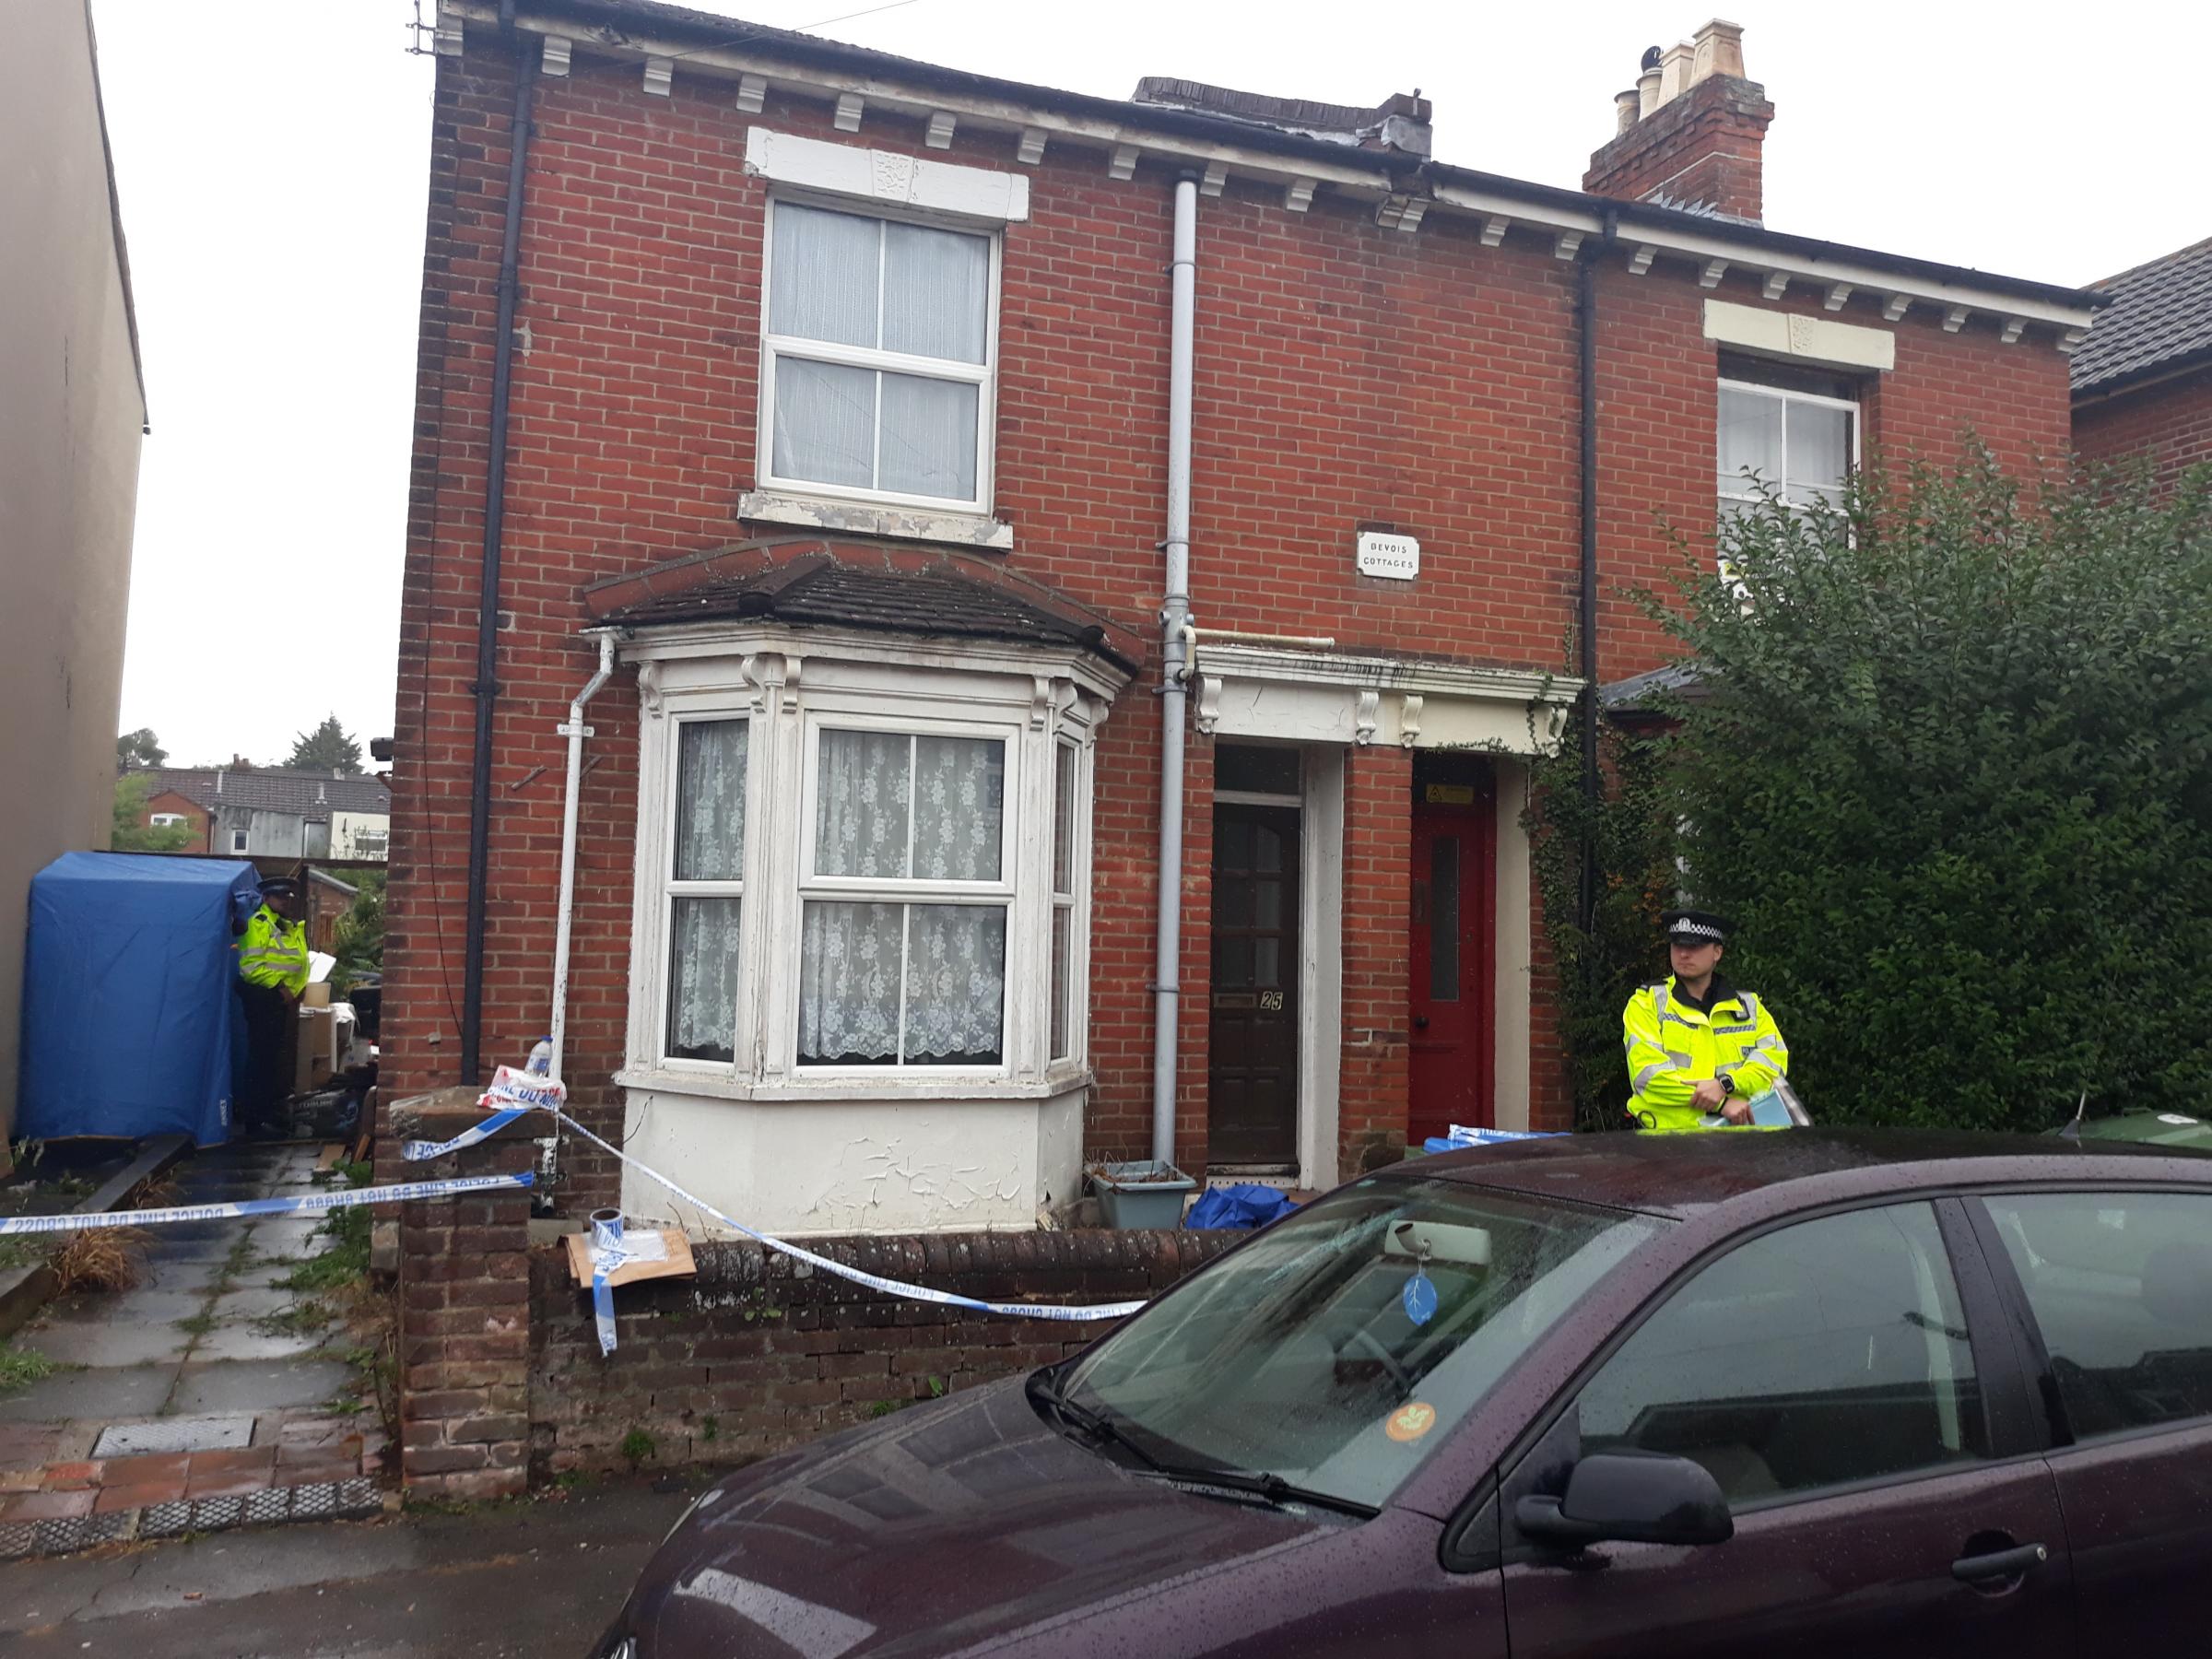 Police at an address in Spear Road Southampton after a body was found